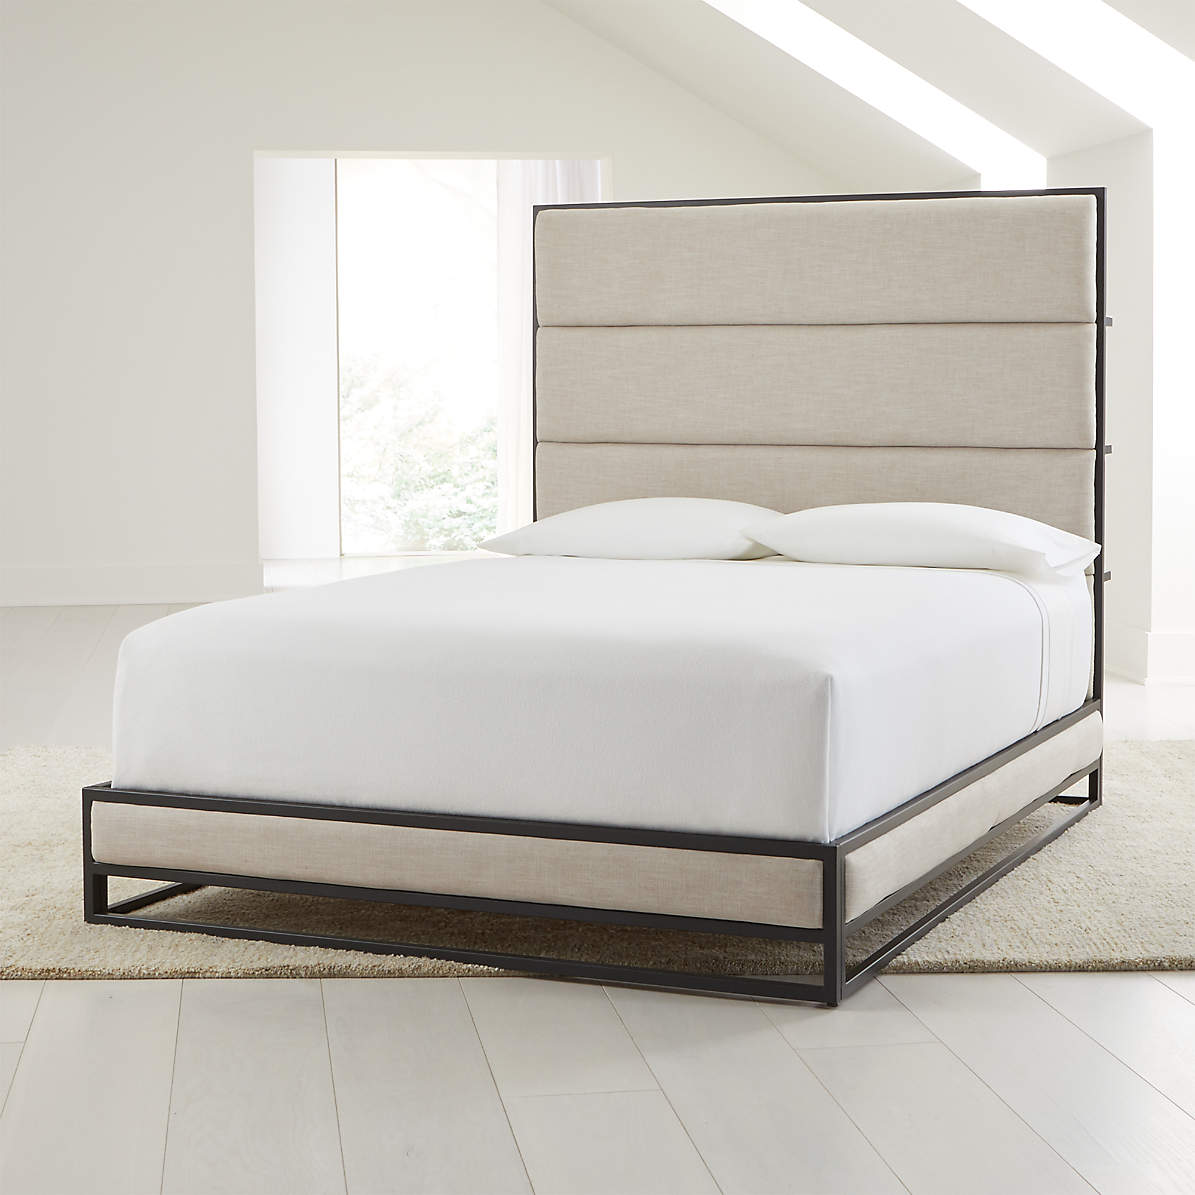 https://cb.scene7.com/is/image/Crate/OxfordIvoryUphQueenBedSHF19_1x1/$web_pdp_main_carousel_zoom_med$/190531133200/oxford-ivory-upholstered-queen-bed.jpg